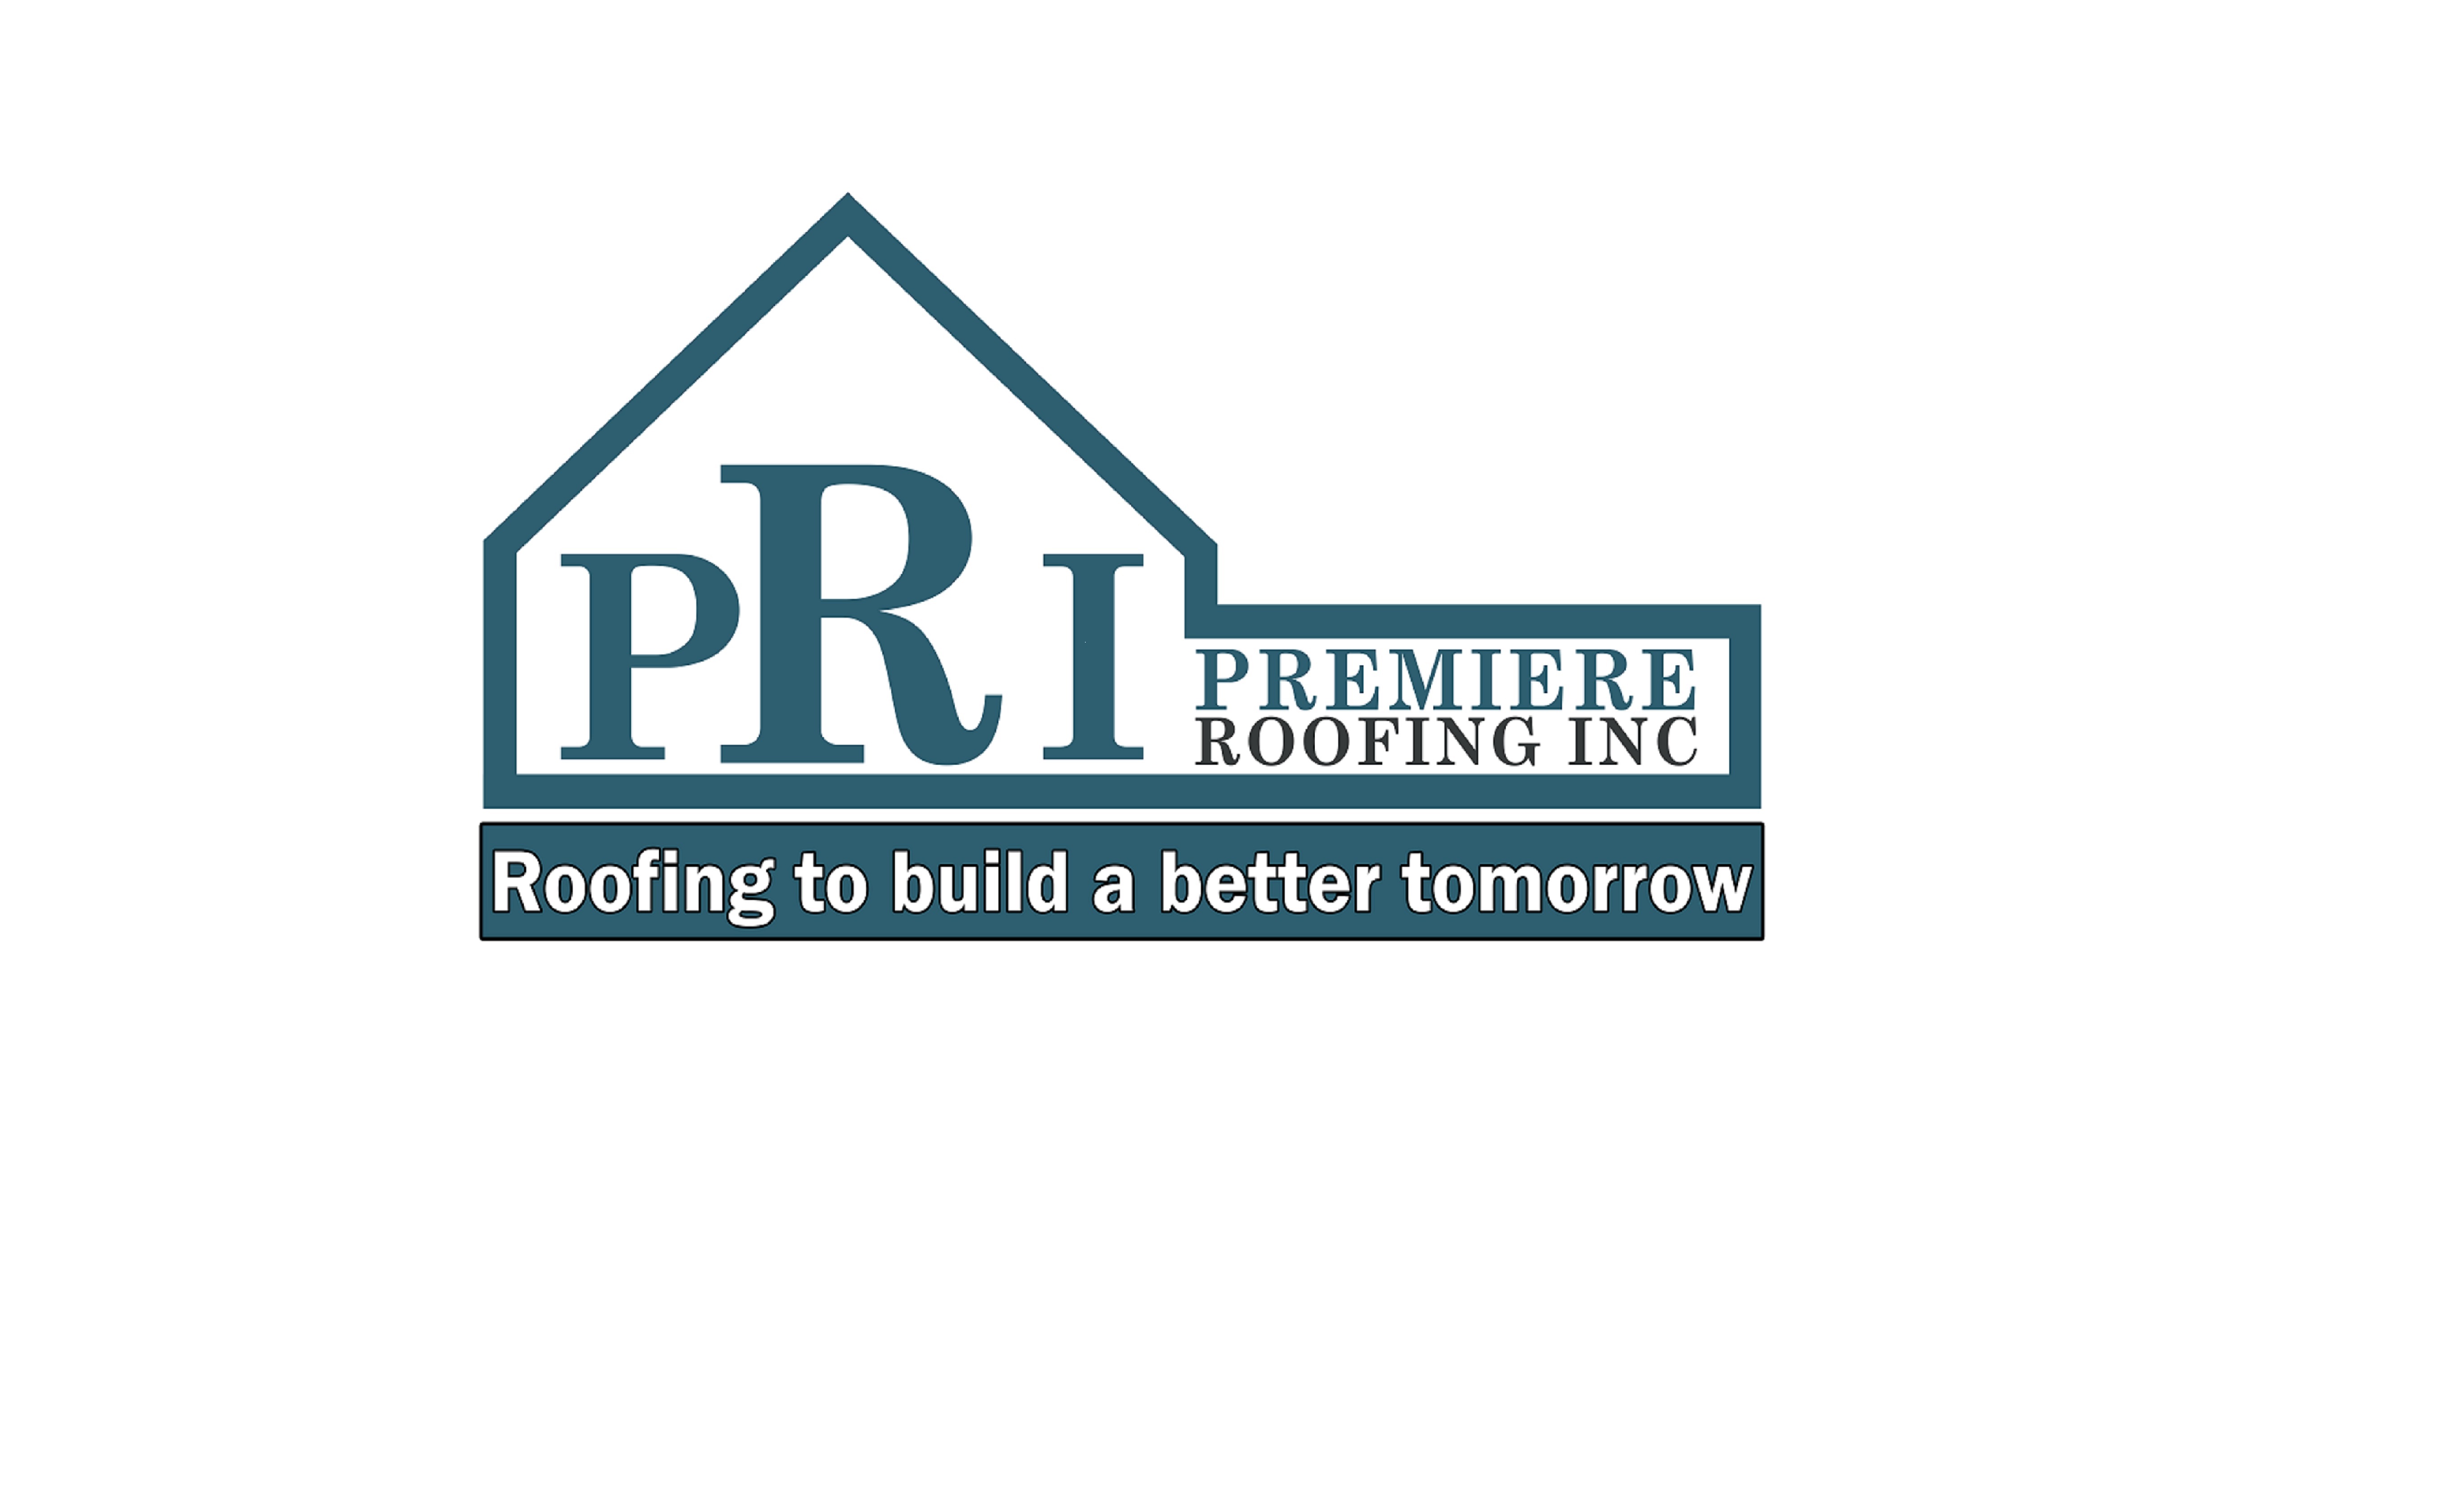 P.R.I. - Premiere Roofing, Inc.'s Logo